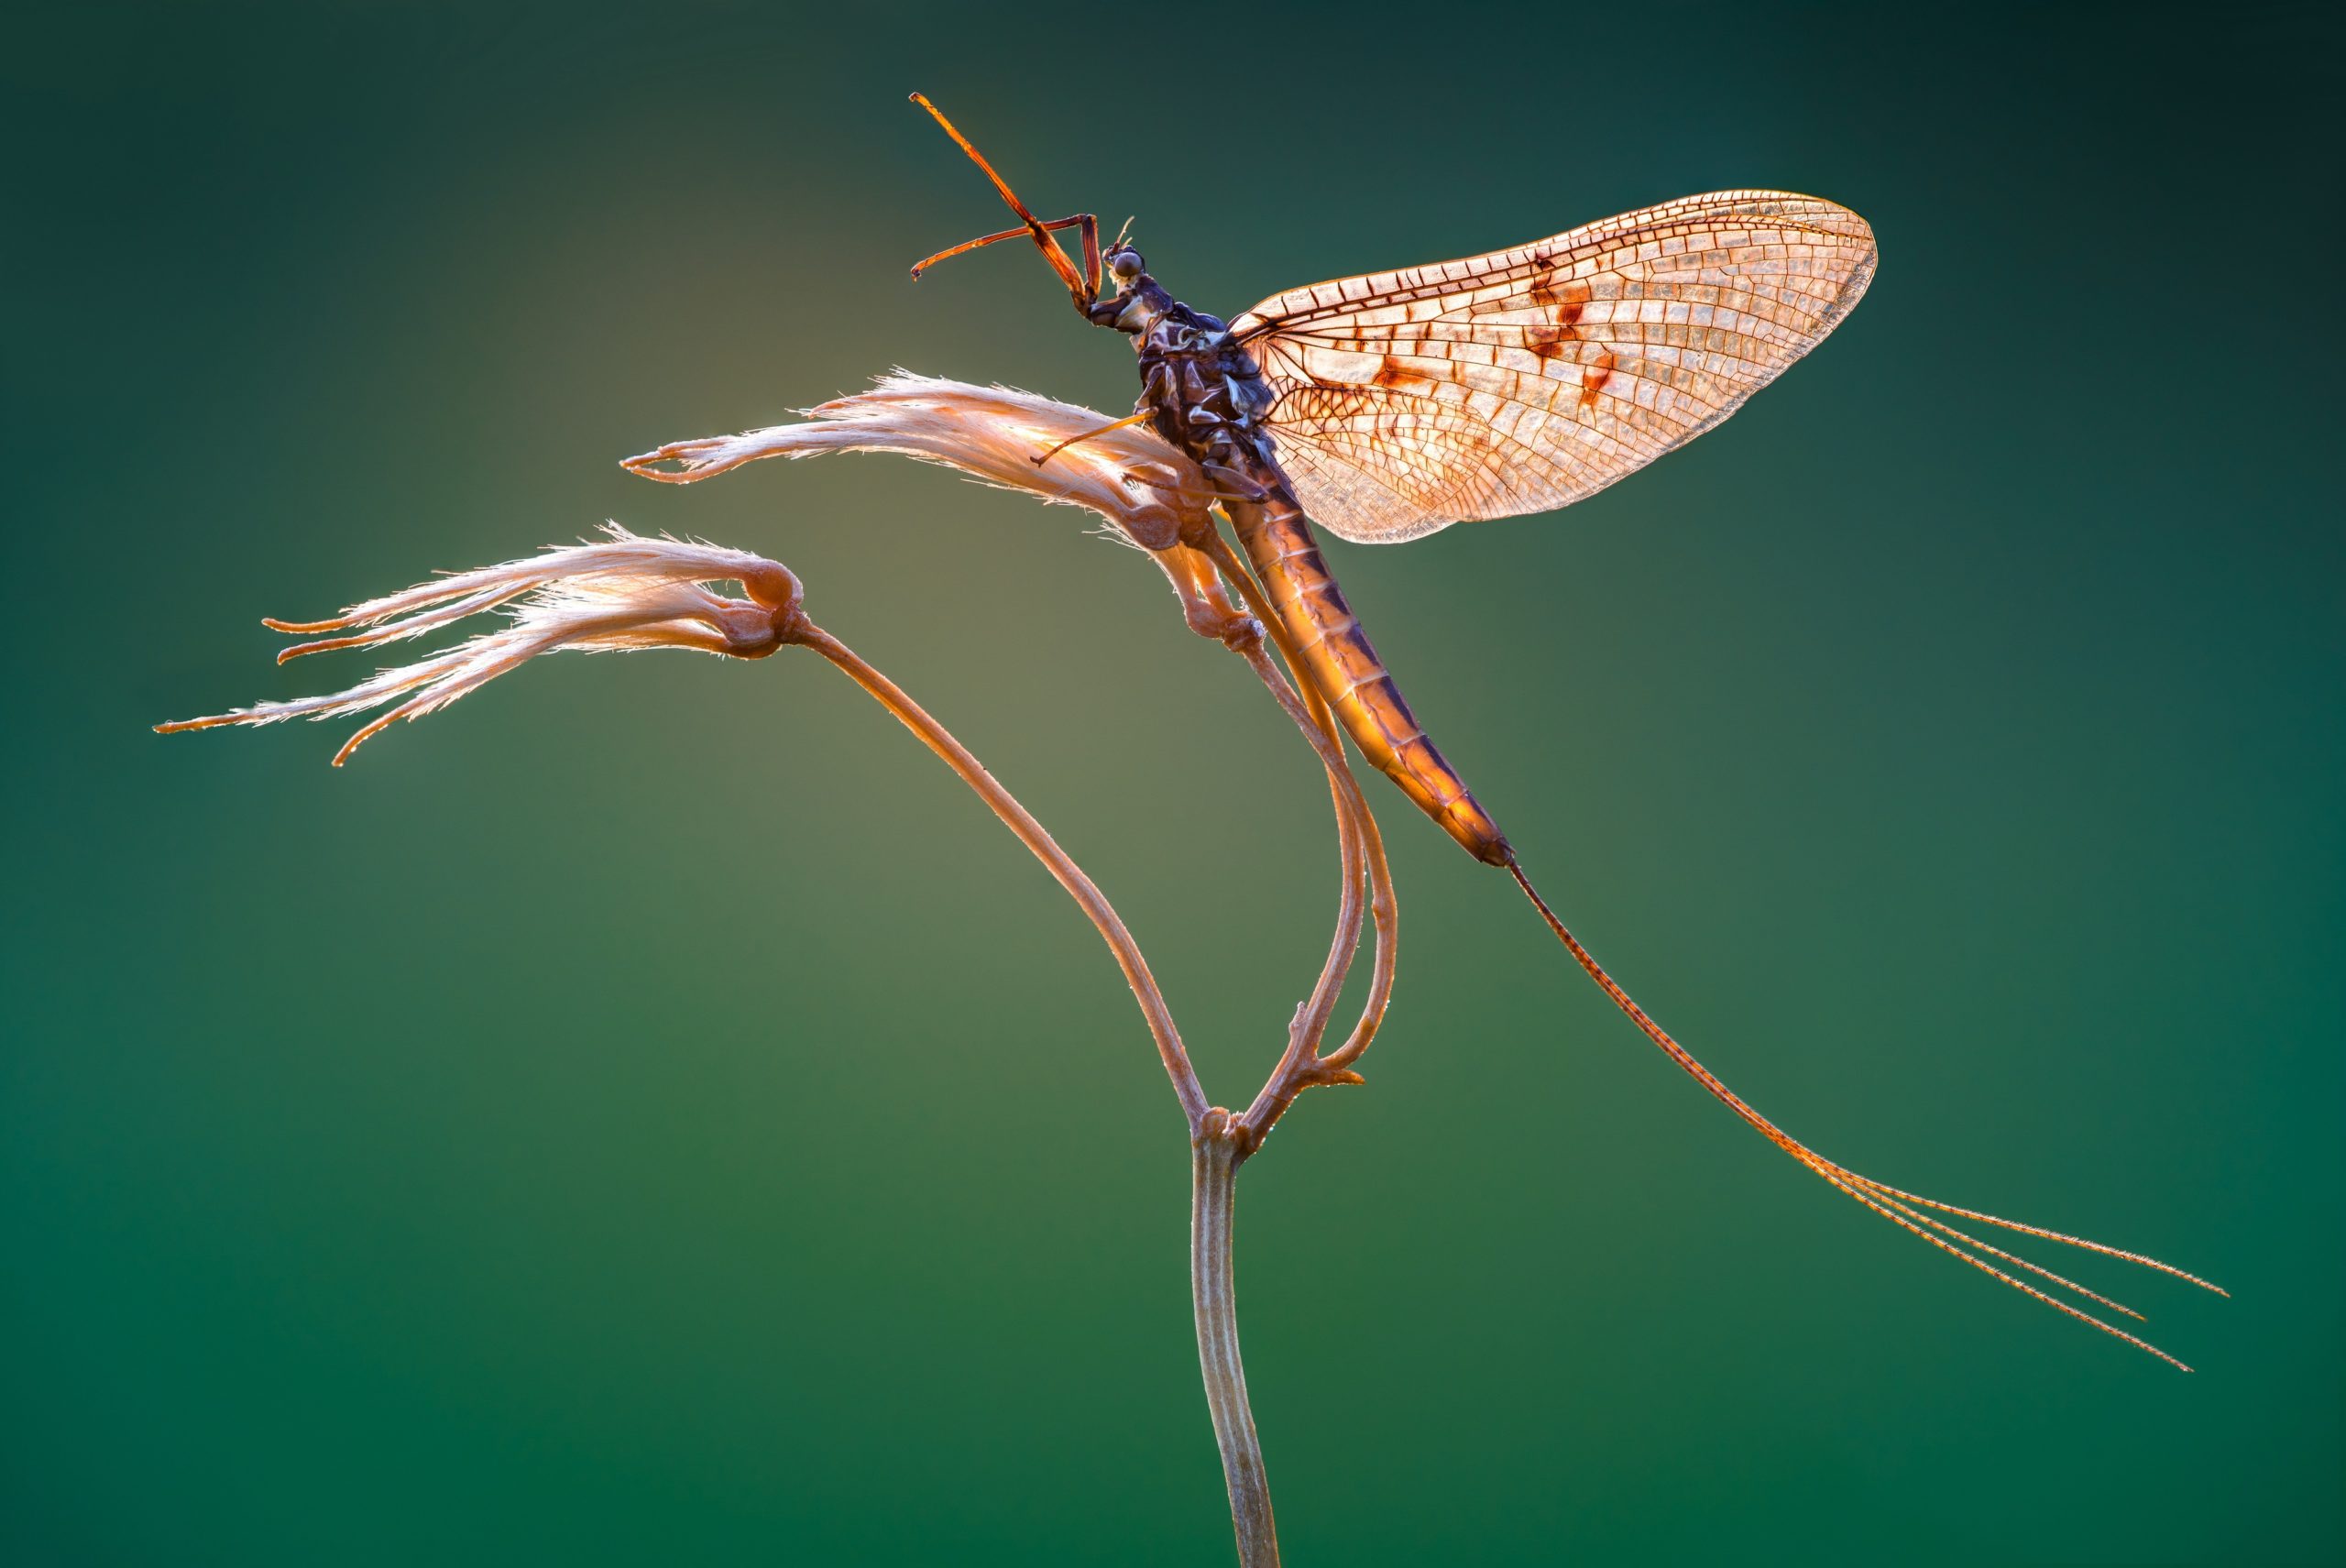 Mayfly resting on a stem in the early morning, just before sunrise